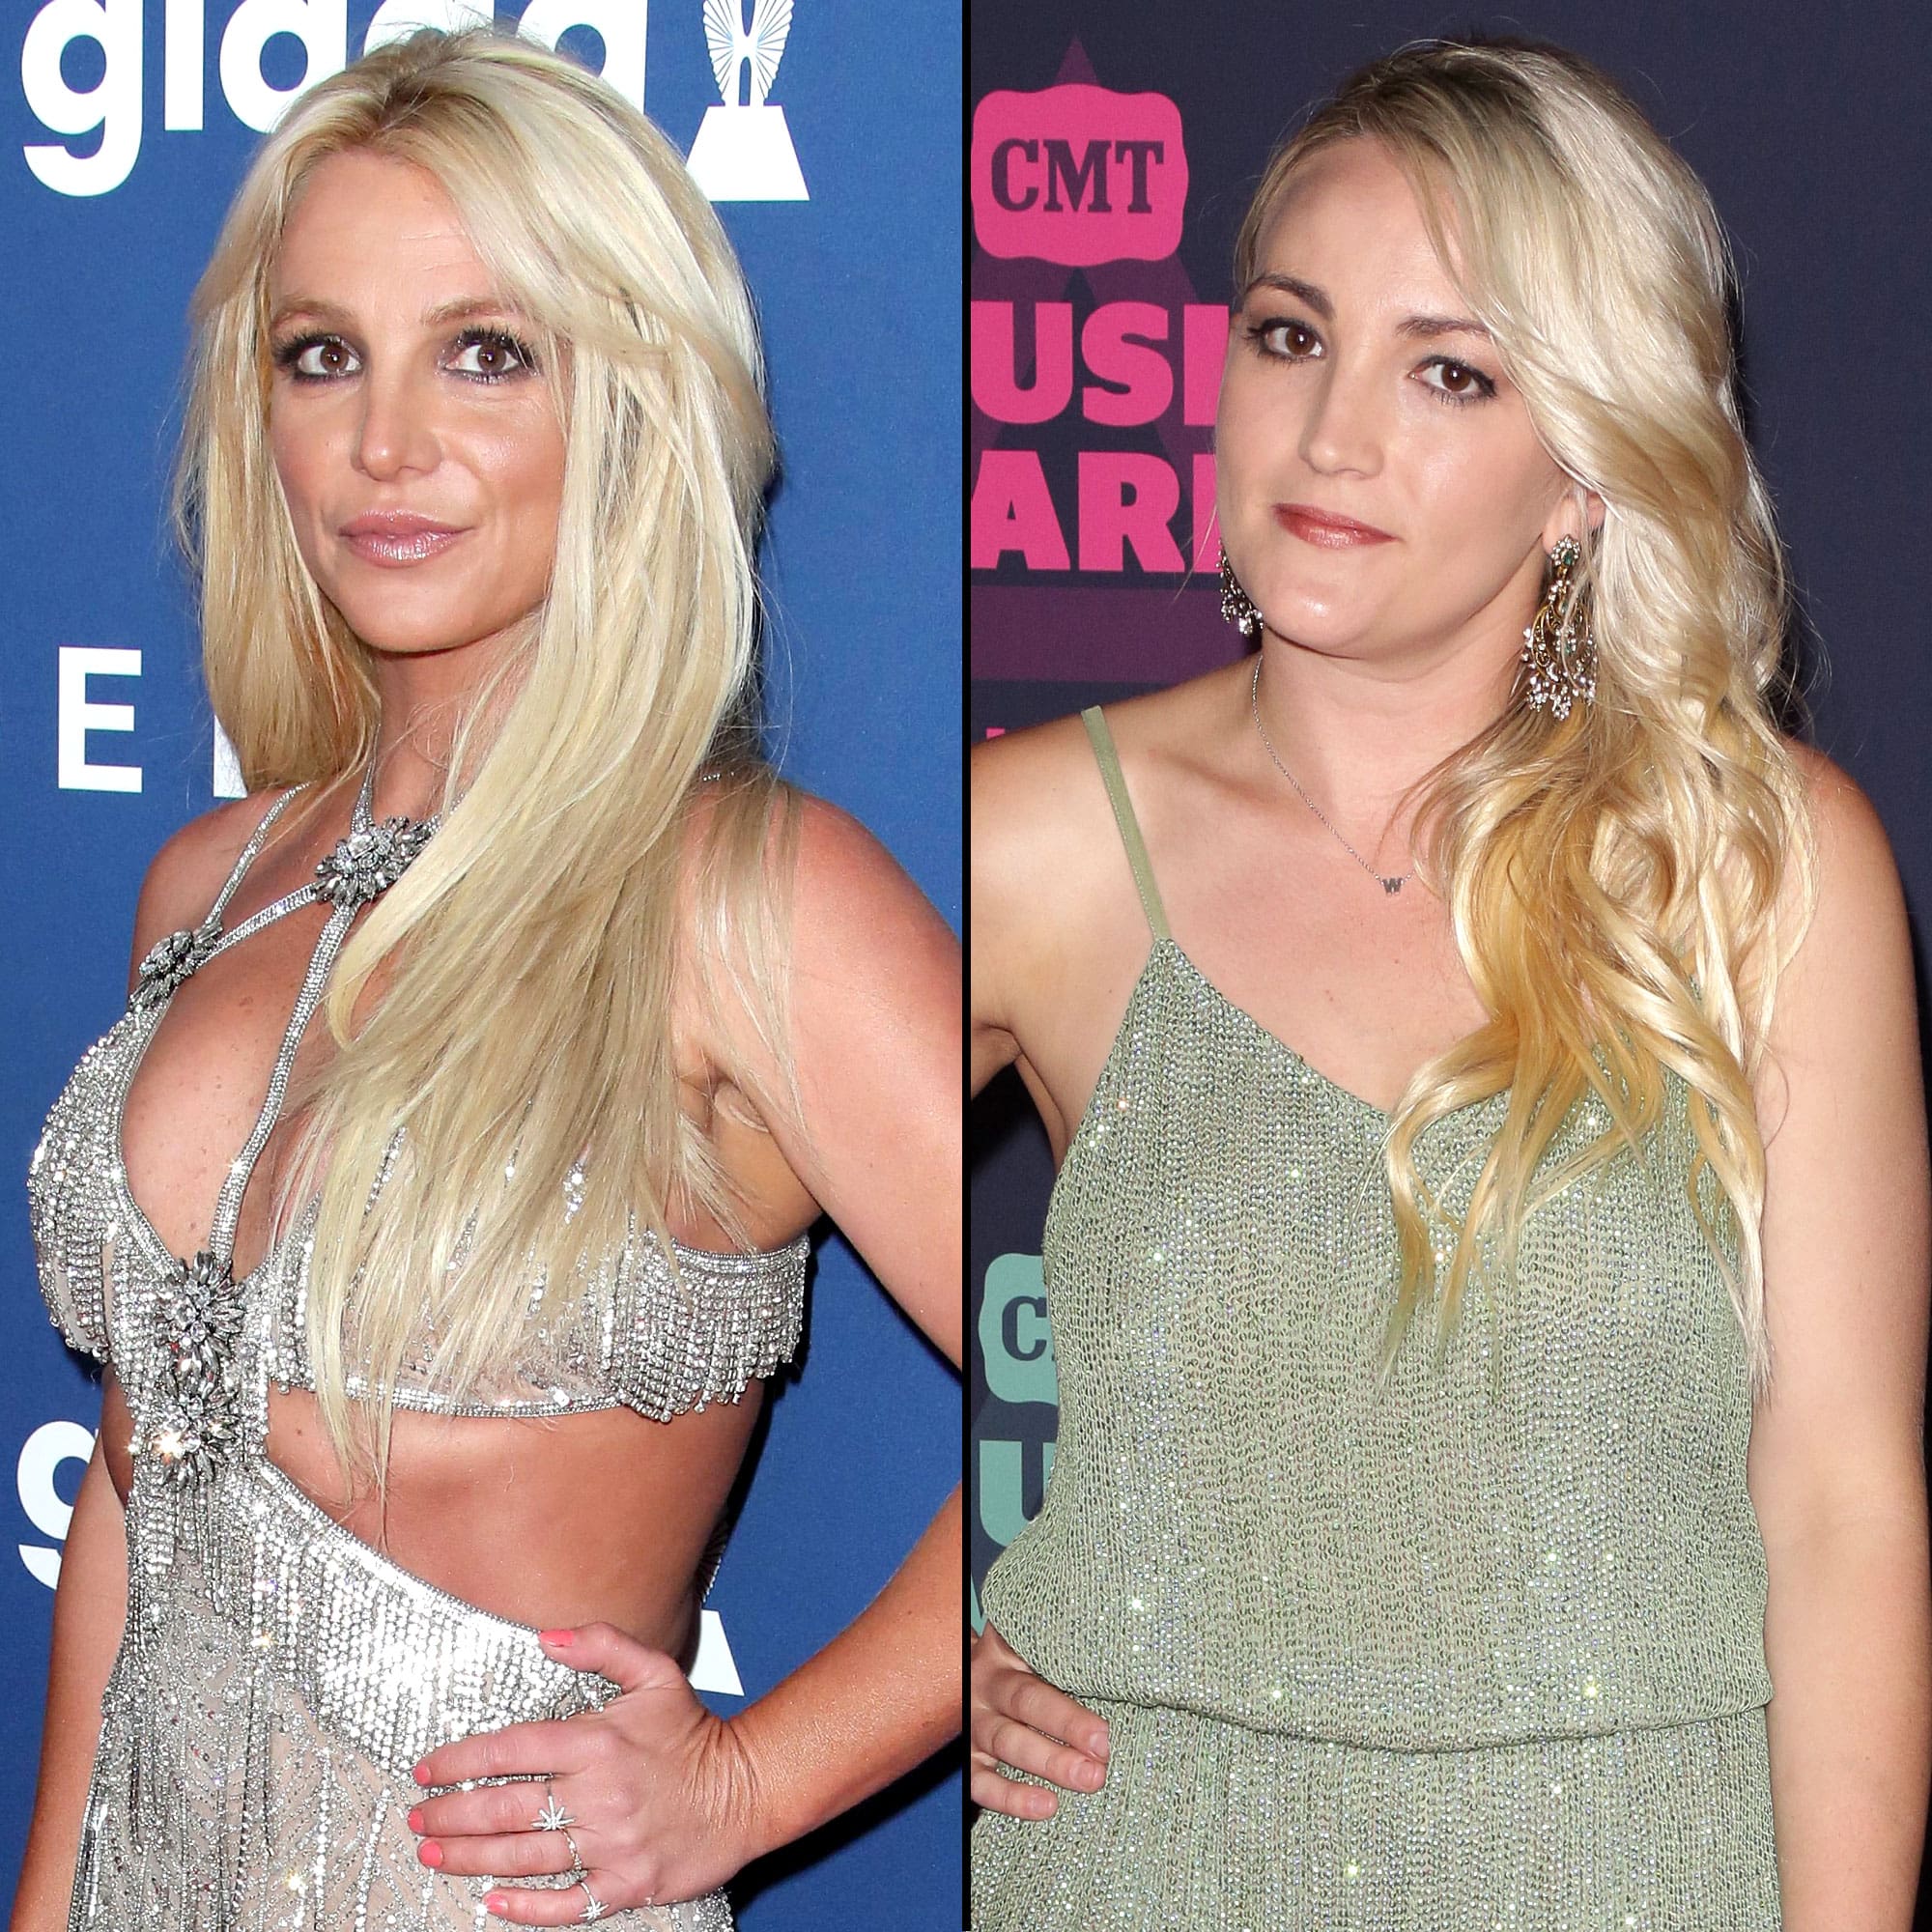 ”britney-spears-and-her-sister-continue-the-media-battle”